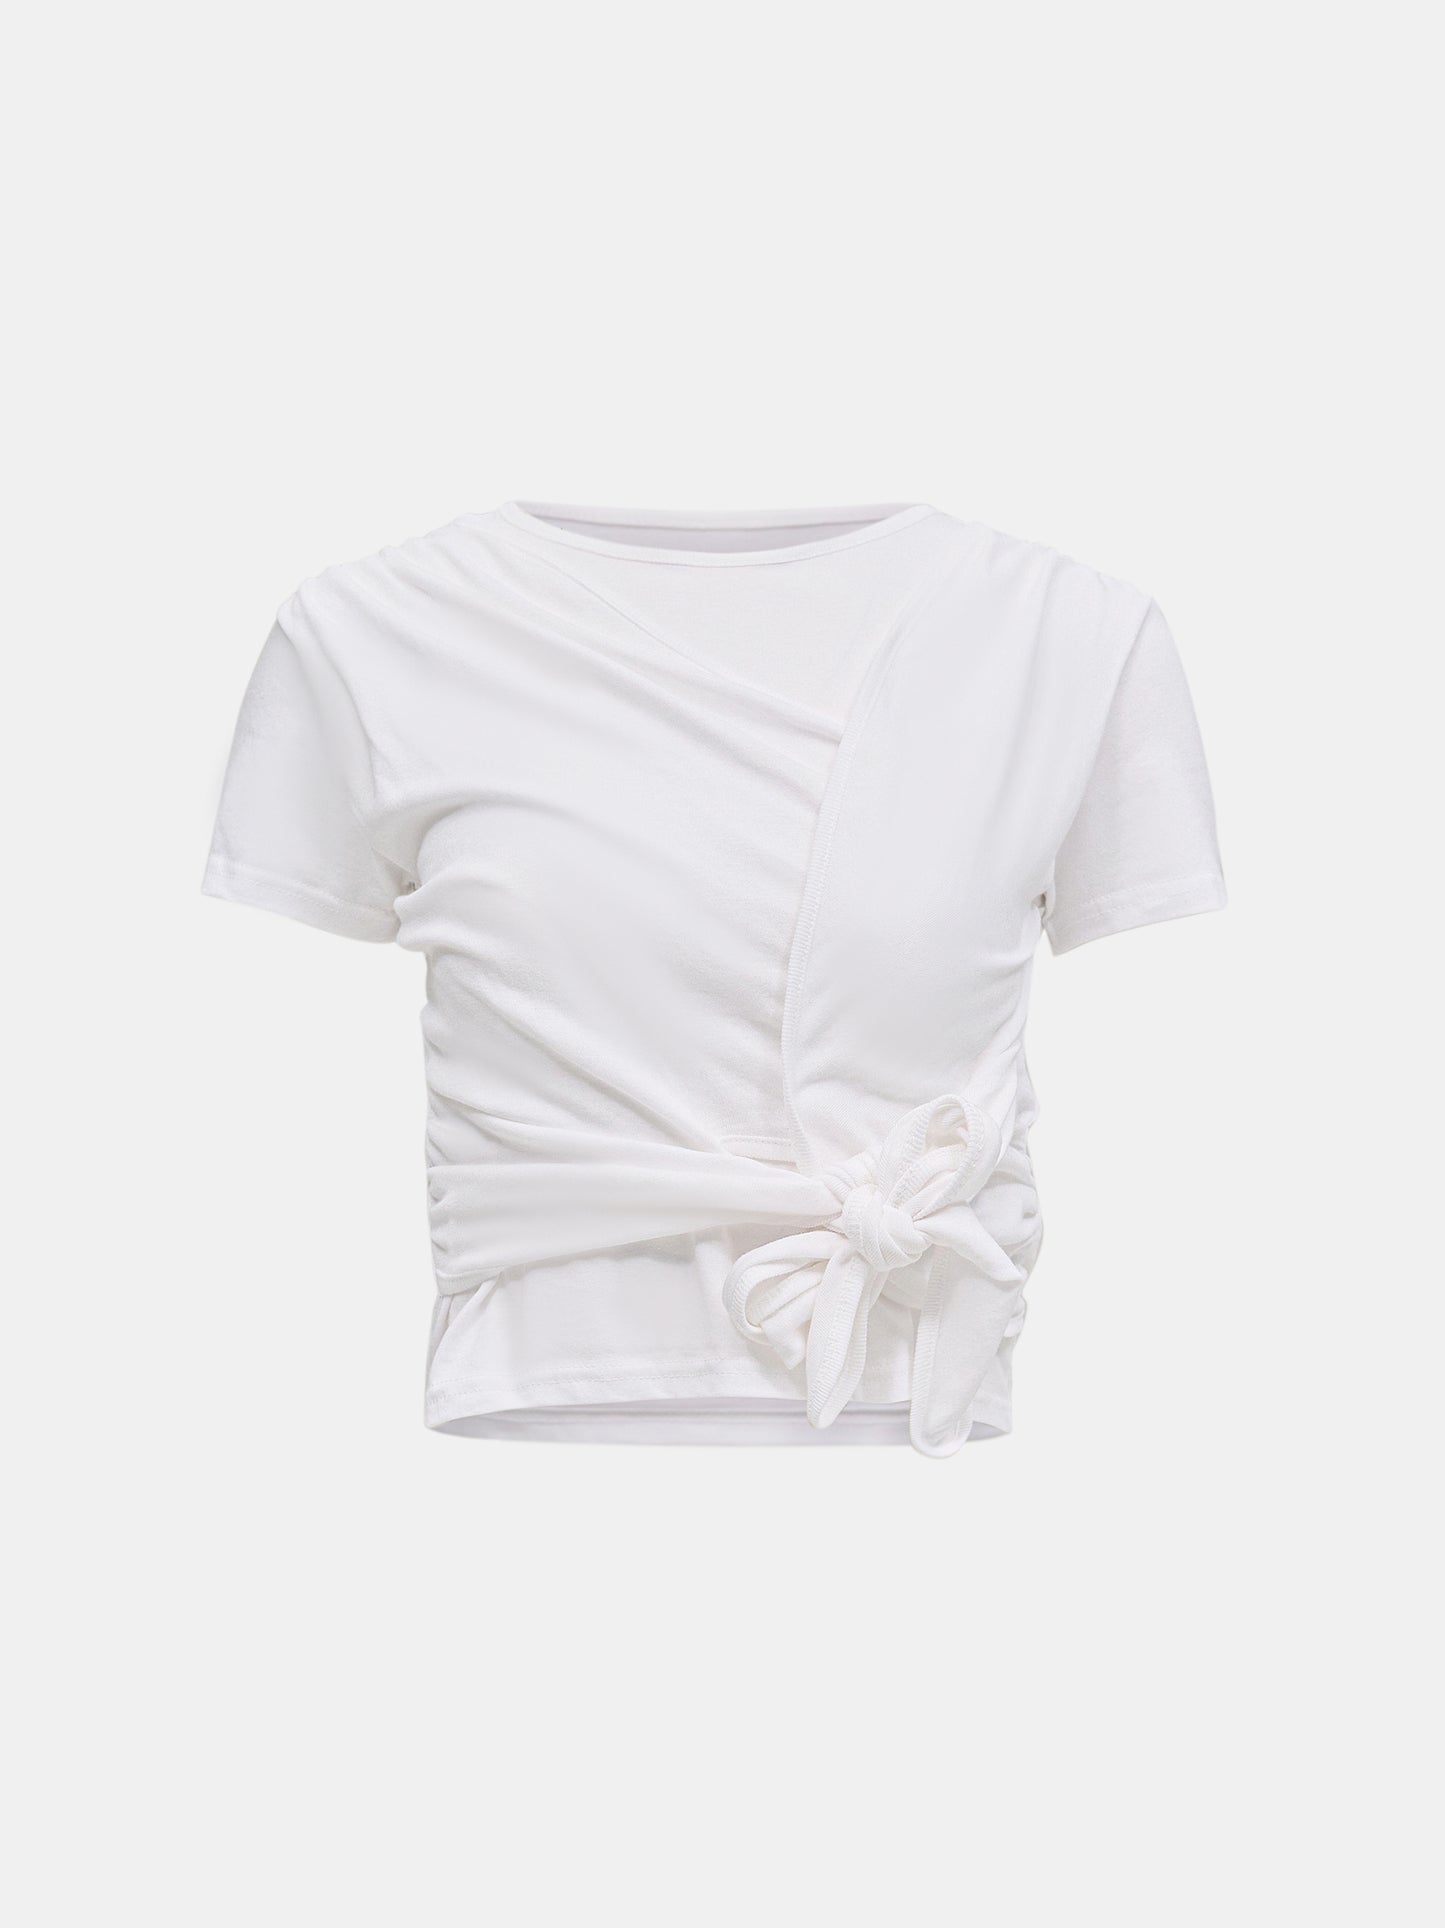 Knotted Artist T-Shirts, White